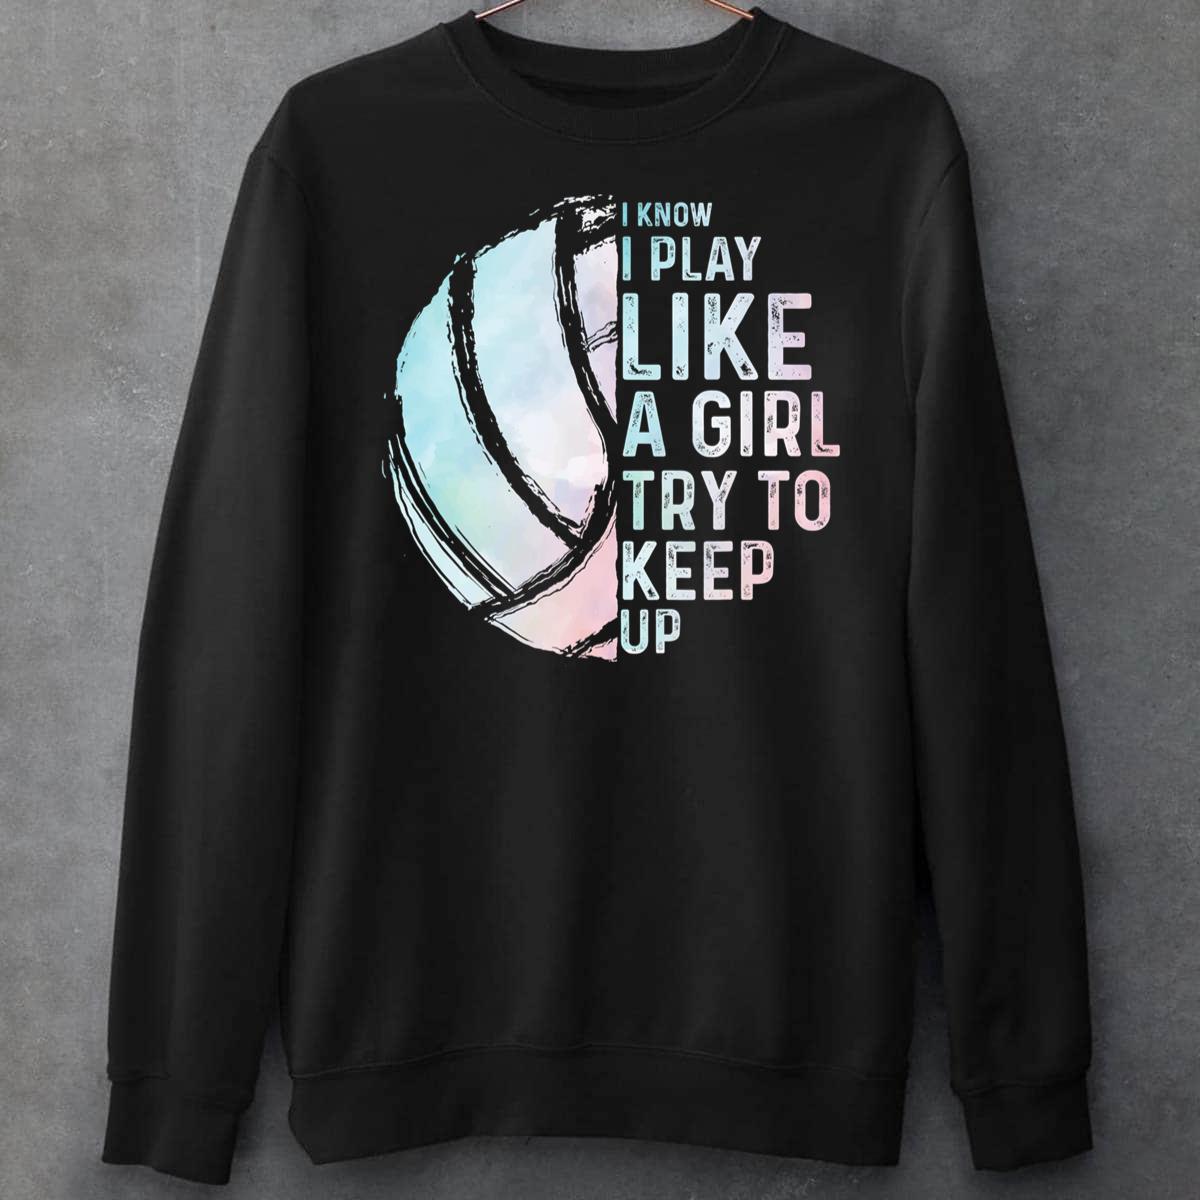 i know i play like a girl try to keep up volleyball tshirt d0dgc85745